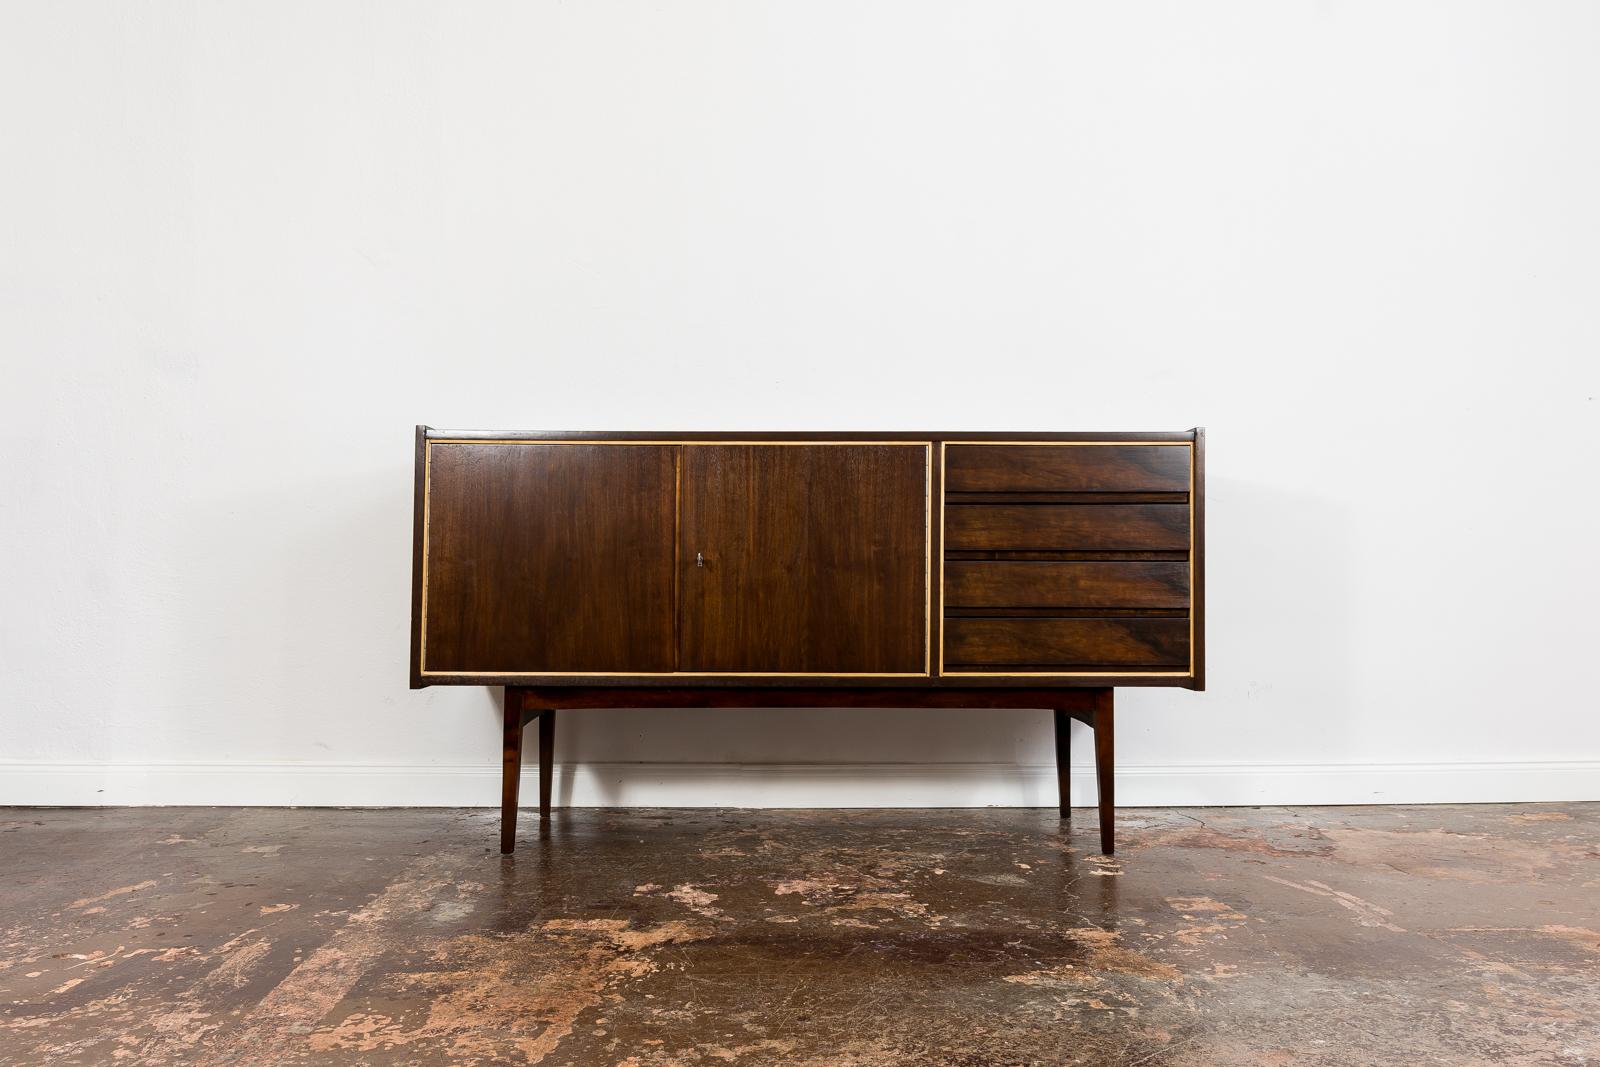 Sideboard designed by Stanisław Albracht for Bydgoskie Furniture Factories, 1960's, Poland.
This item has been restored and refinished enhancing unique contrasting colors of mahogany veneer.
Sideboard has 2 sliding doors, removable shelf and 4